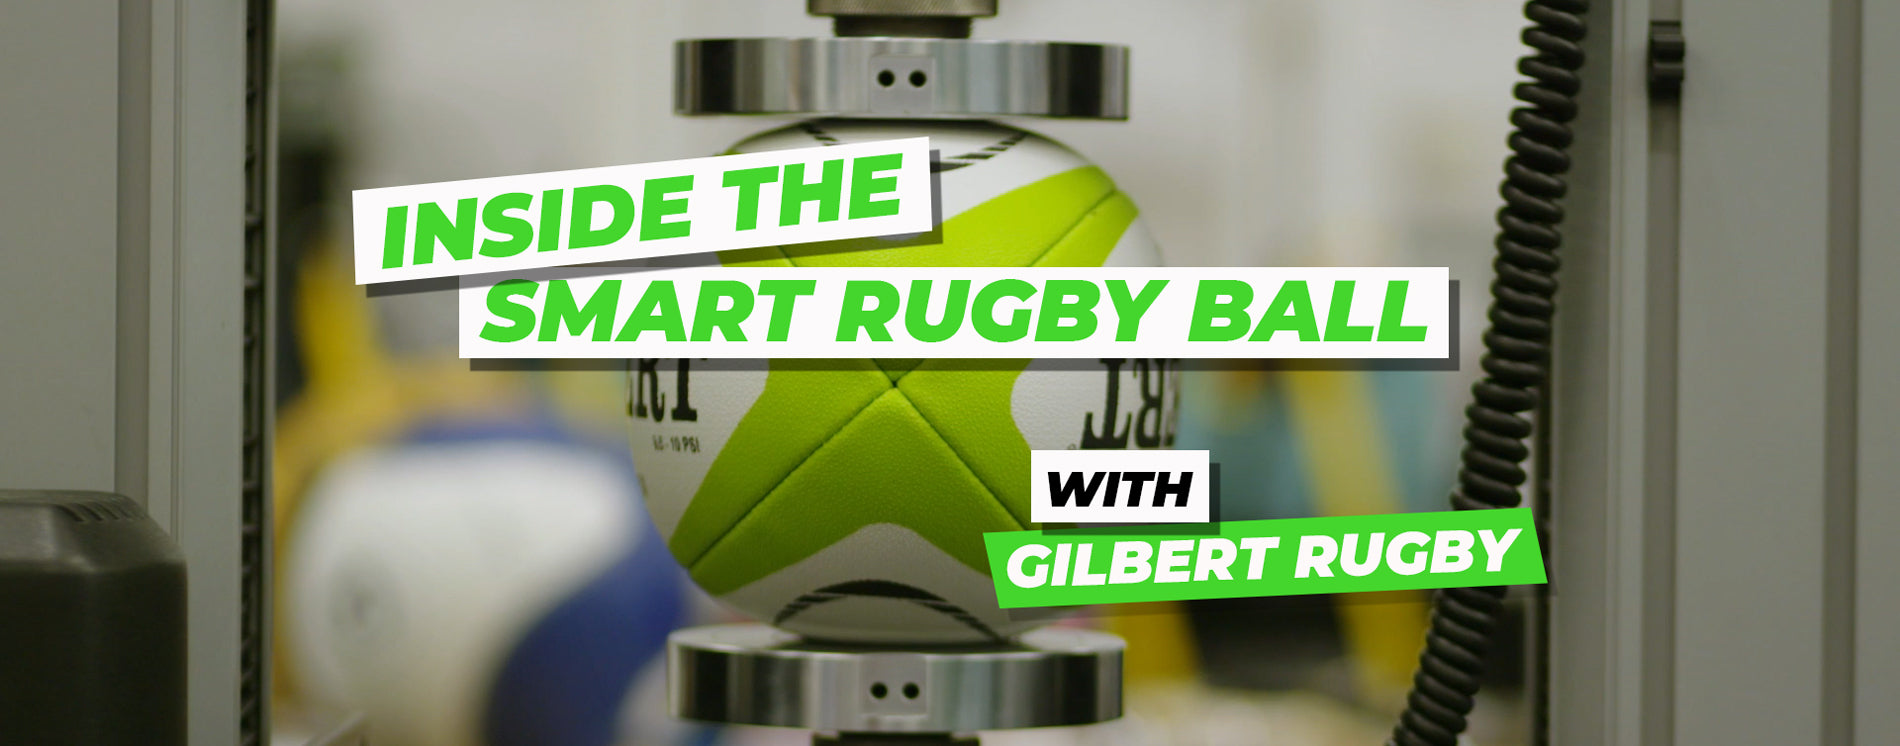 Inside the Smart Rugby Ball